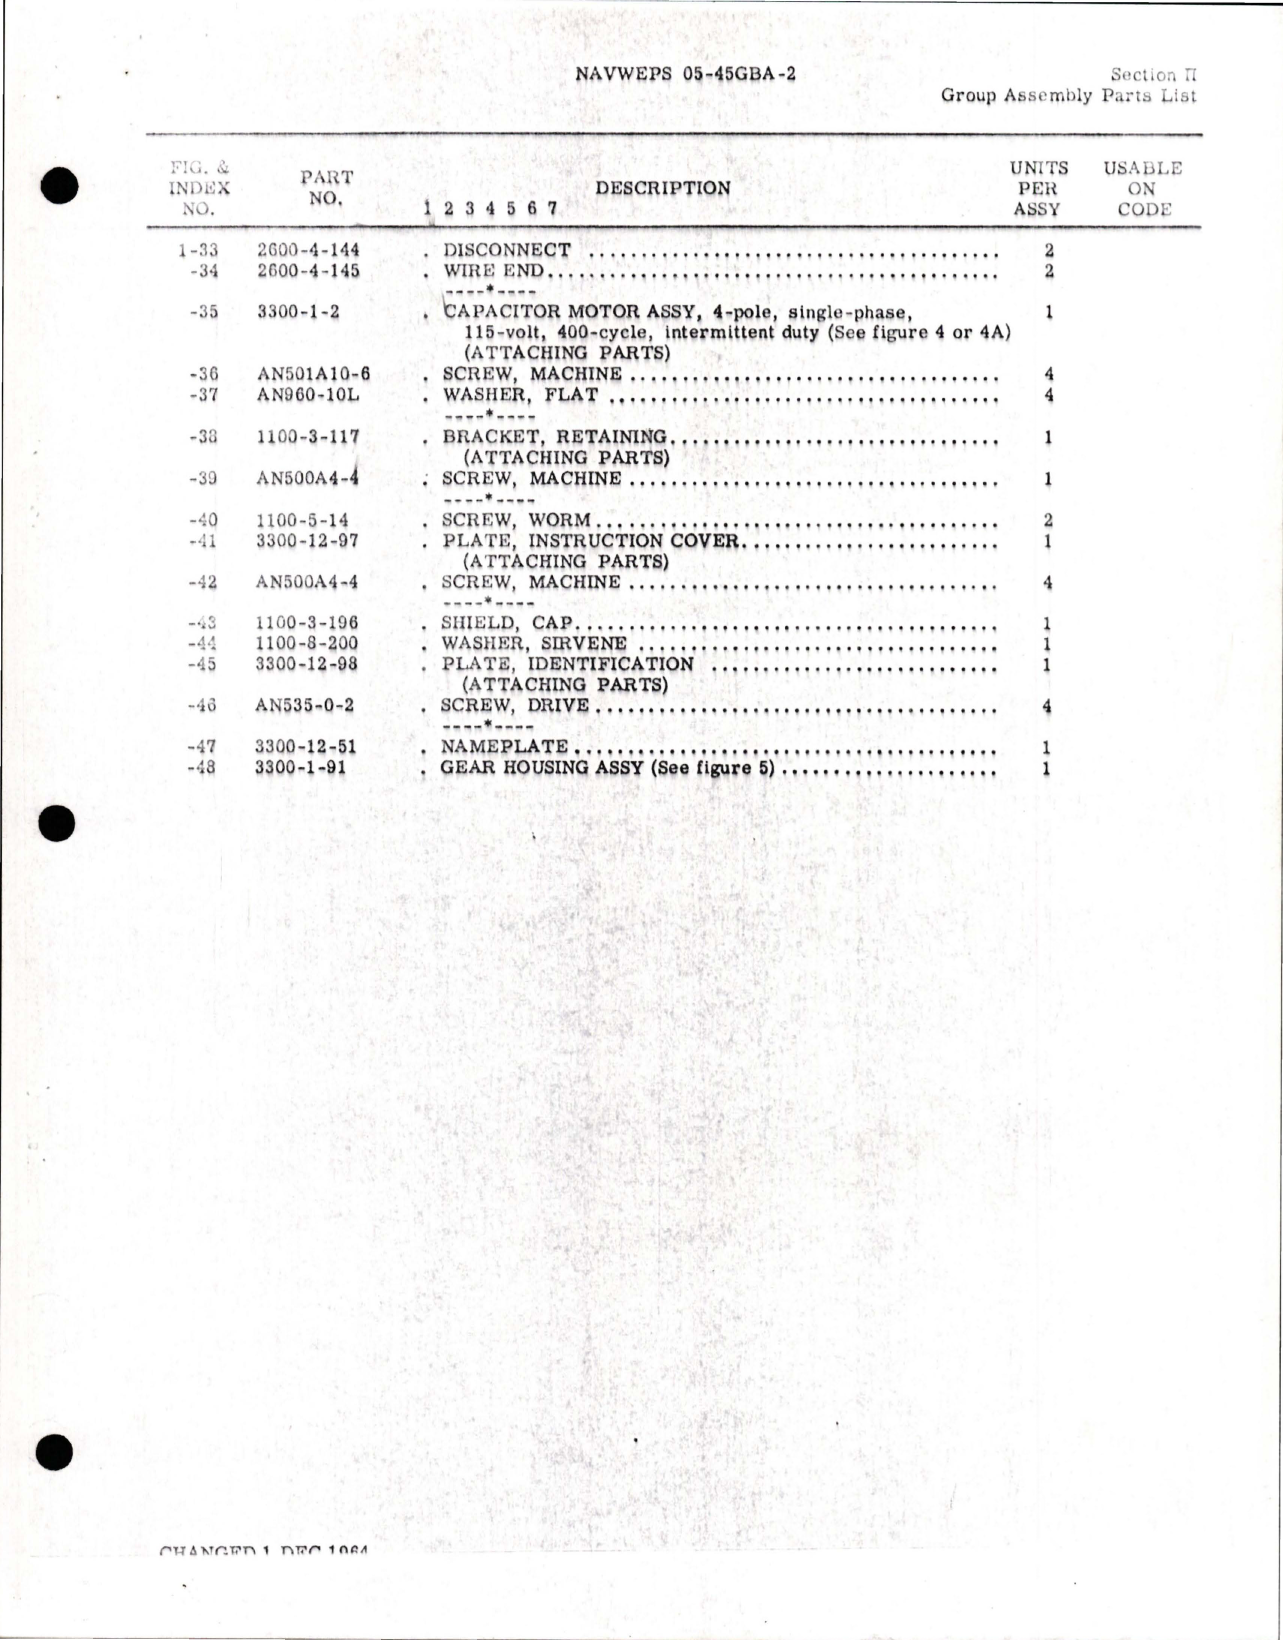 Sample page 7 from AirCorps Library document: Illustrated Parts Breakdown for Elevator Trim Actuator - MG71B1